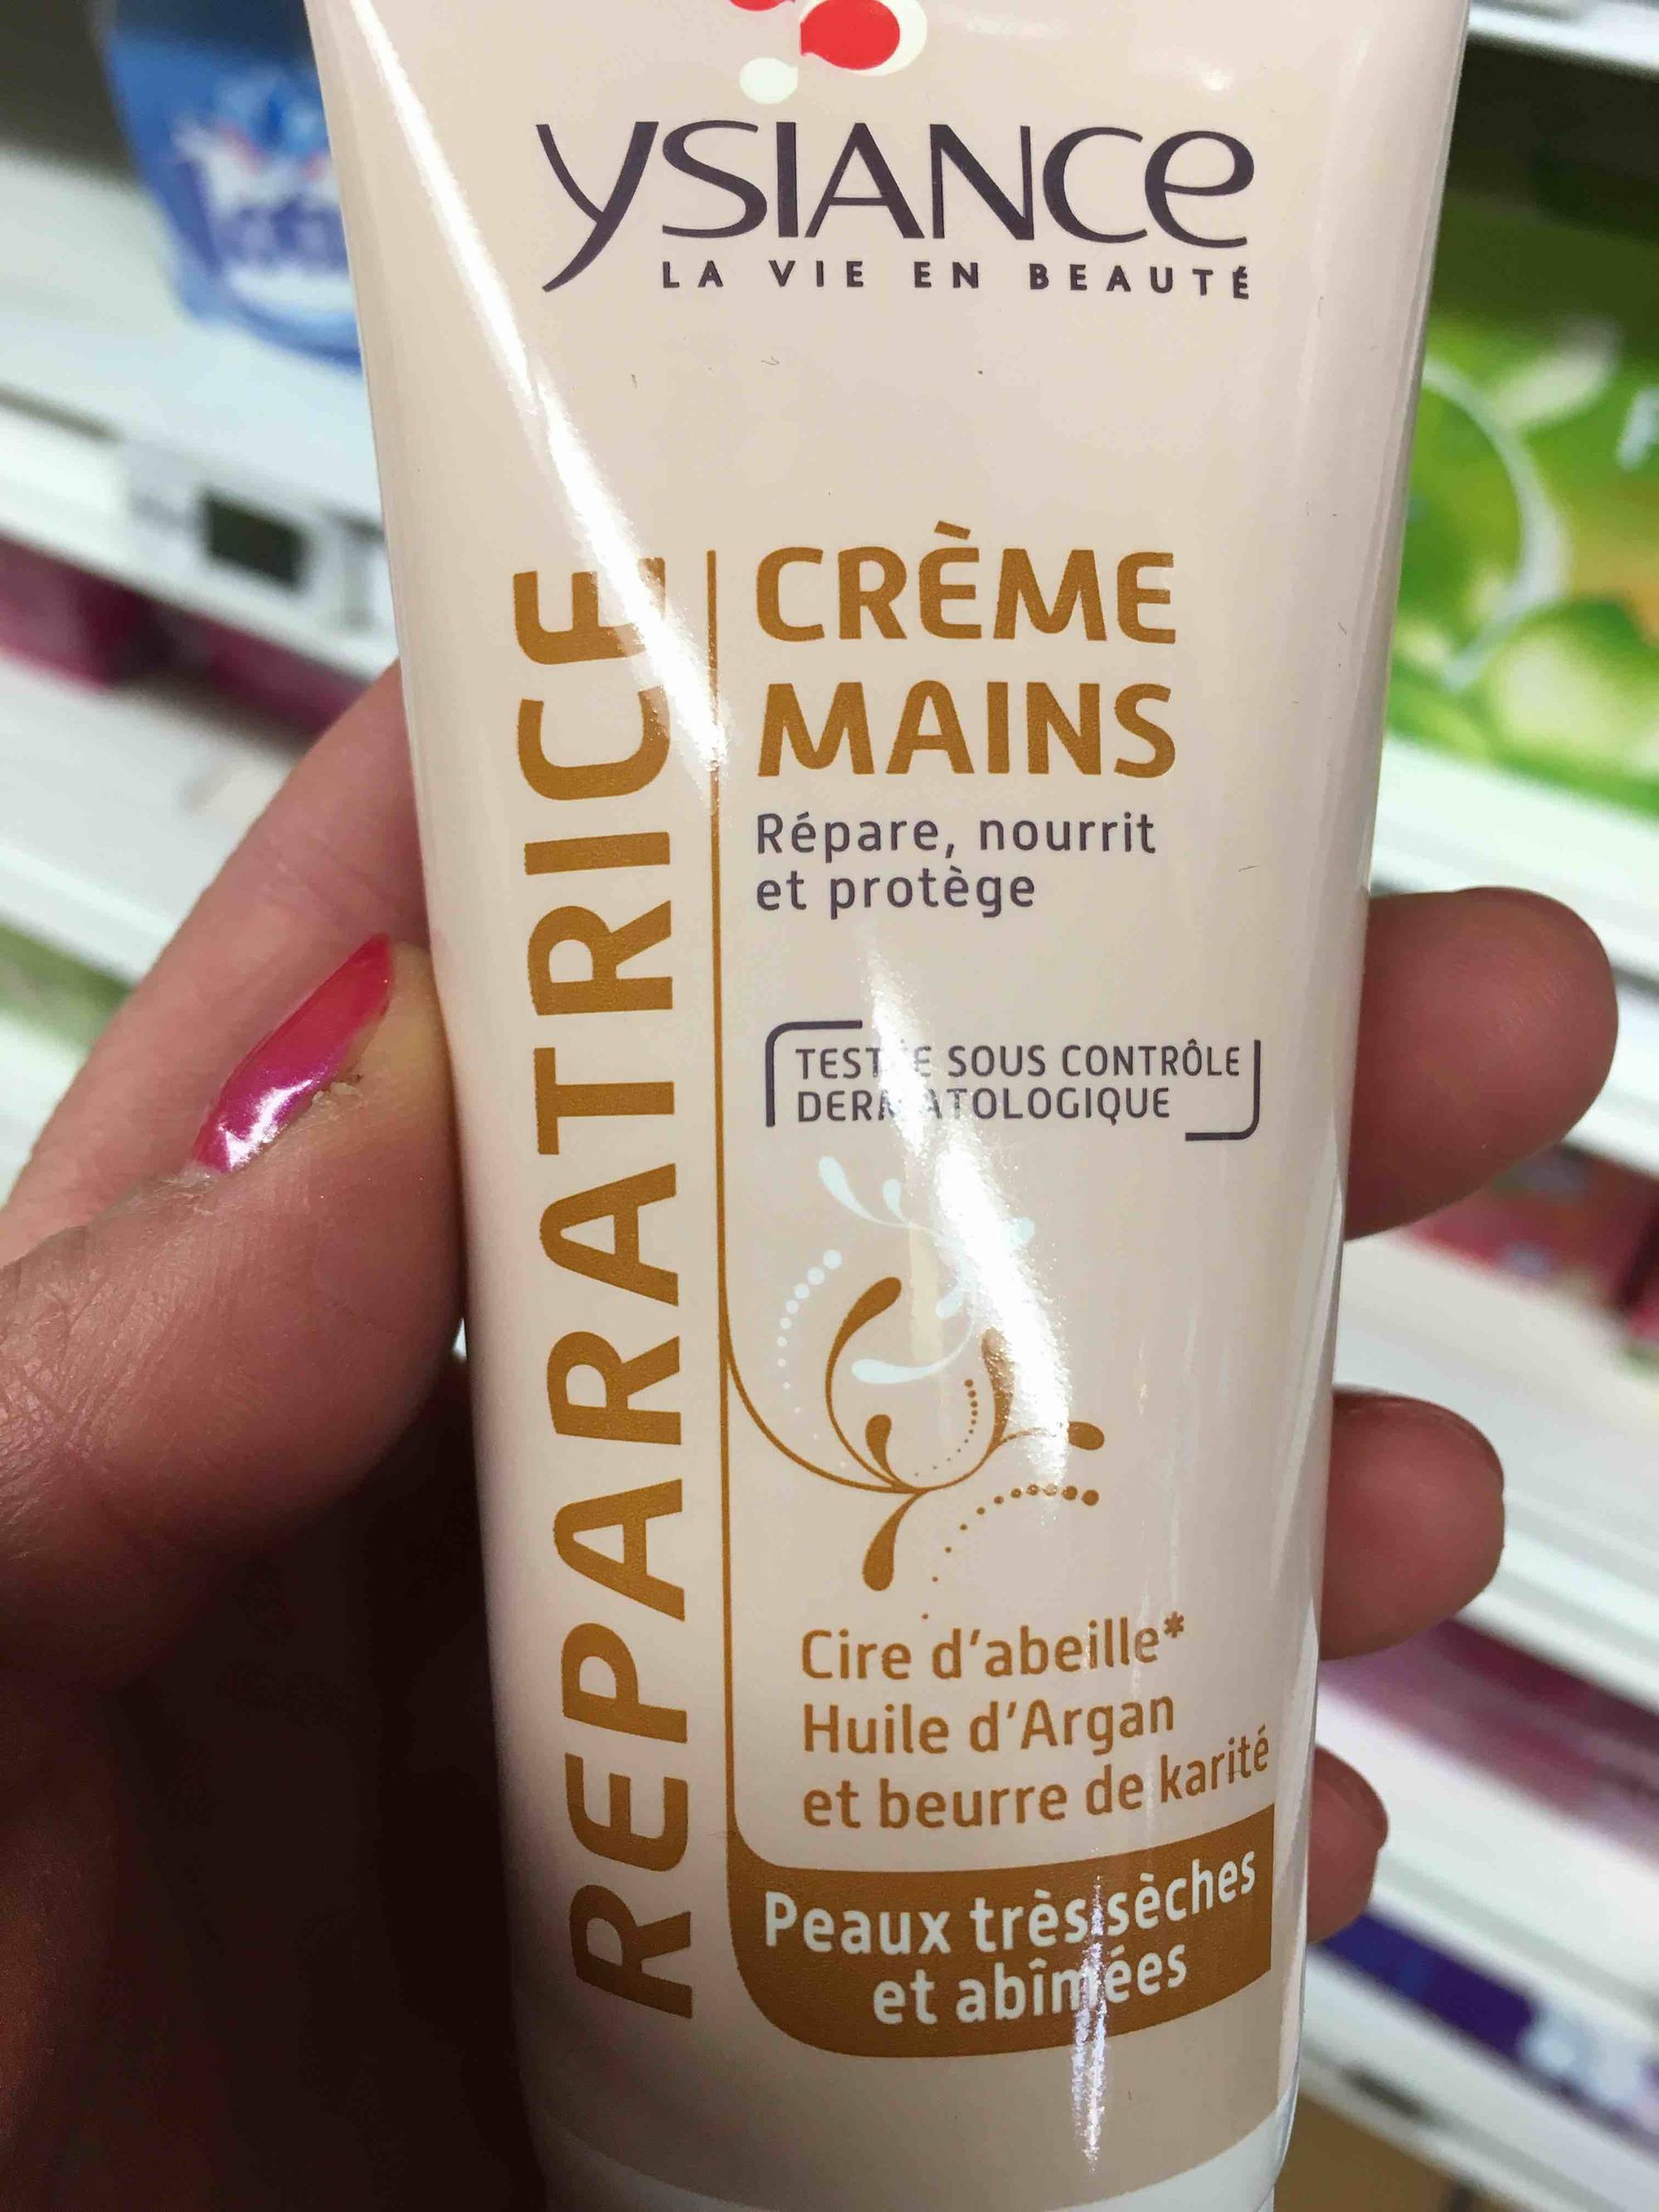  CREME HYDRATANTE VISAGE ET CORPS YSIANCE : Beauty & Personal  Care